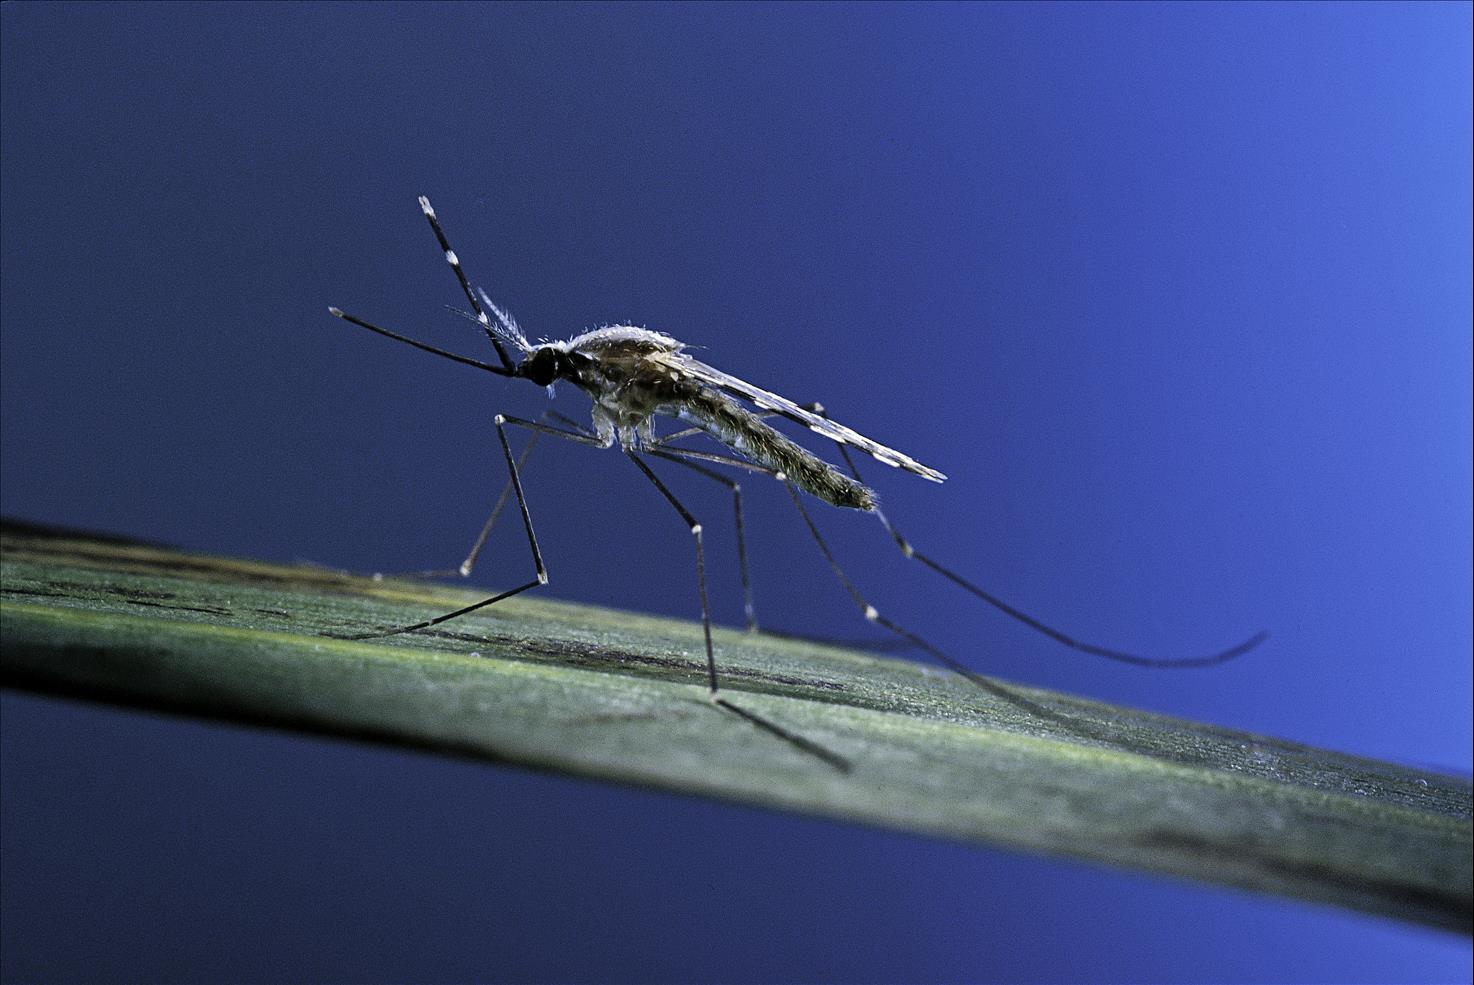 Genetically Changed Mosquitoes Could Transform Africa's Long Fight Against Malaria